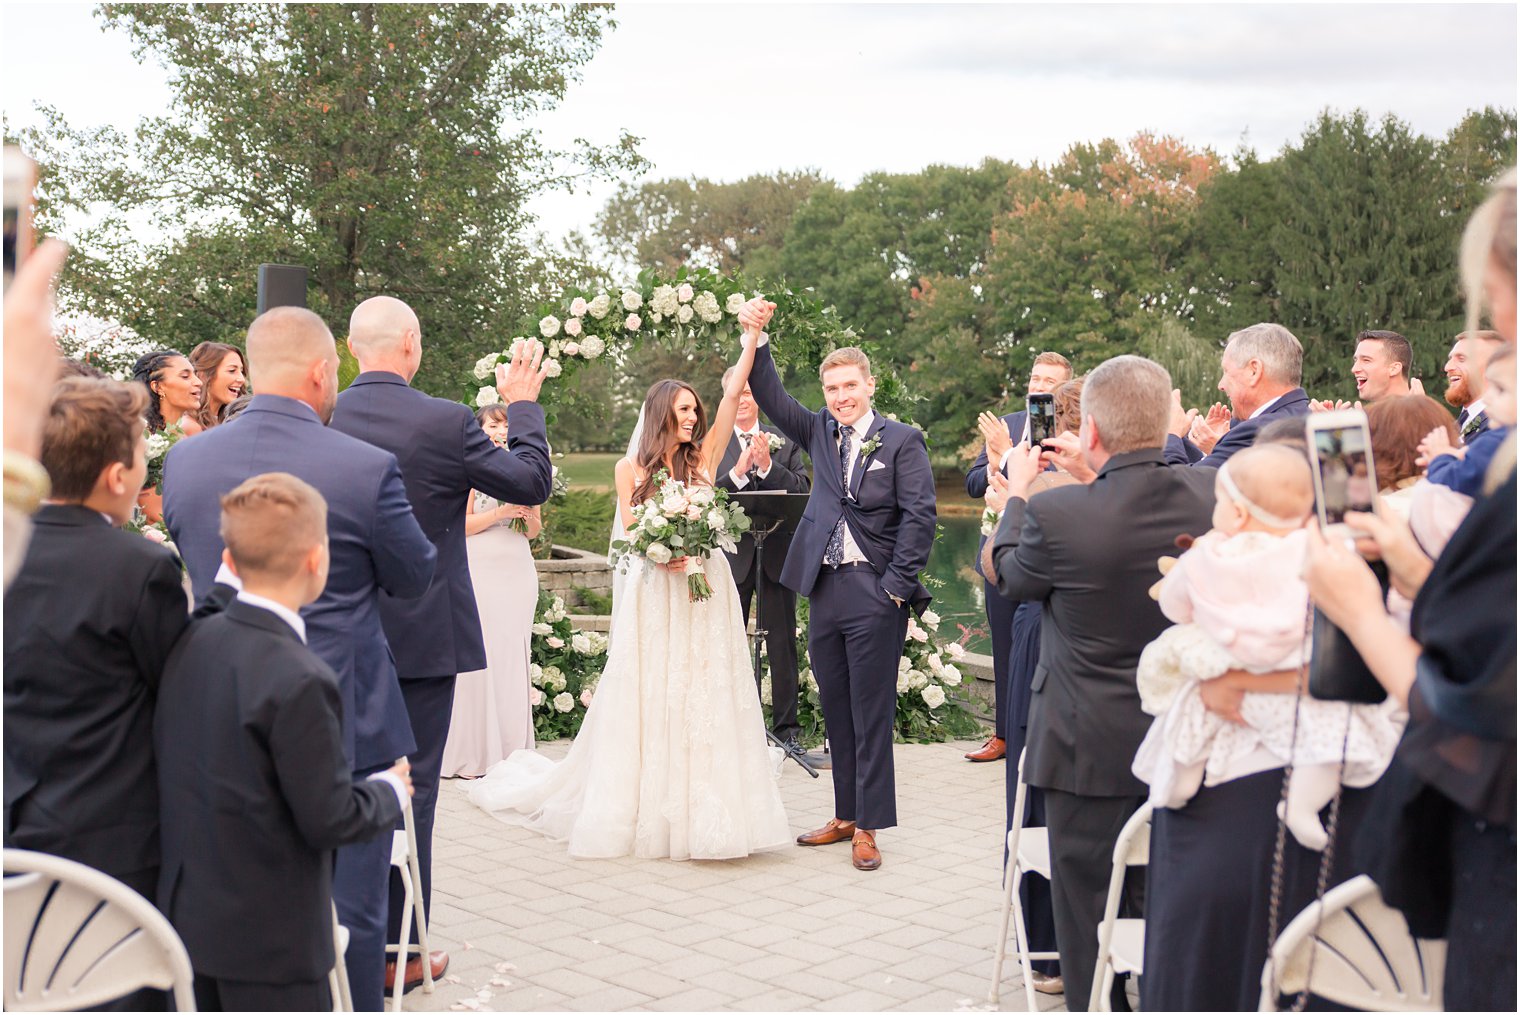 Recessional photo at Windows on the Water at Frogbridge